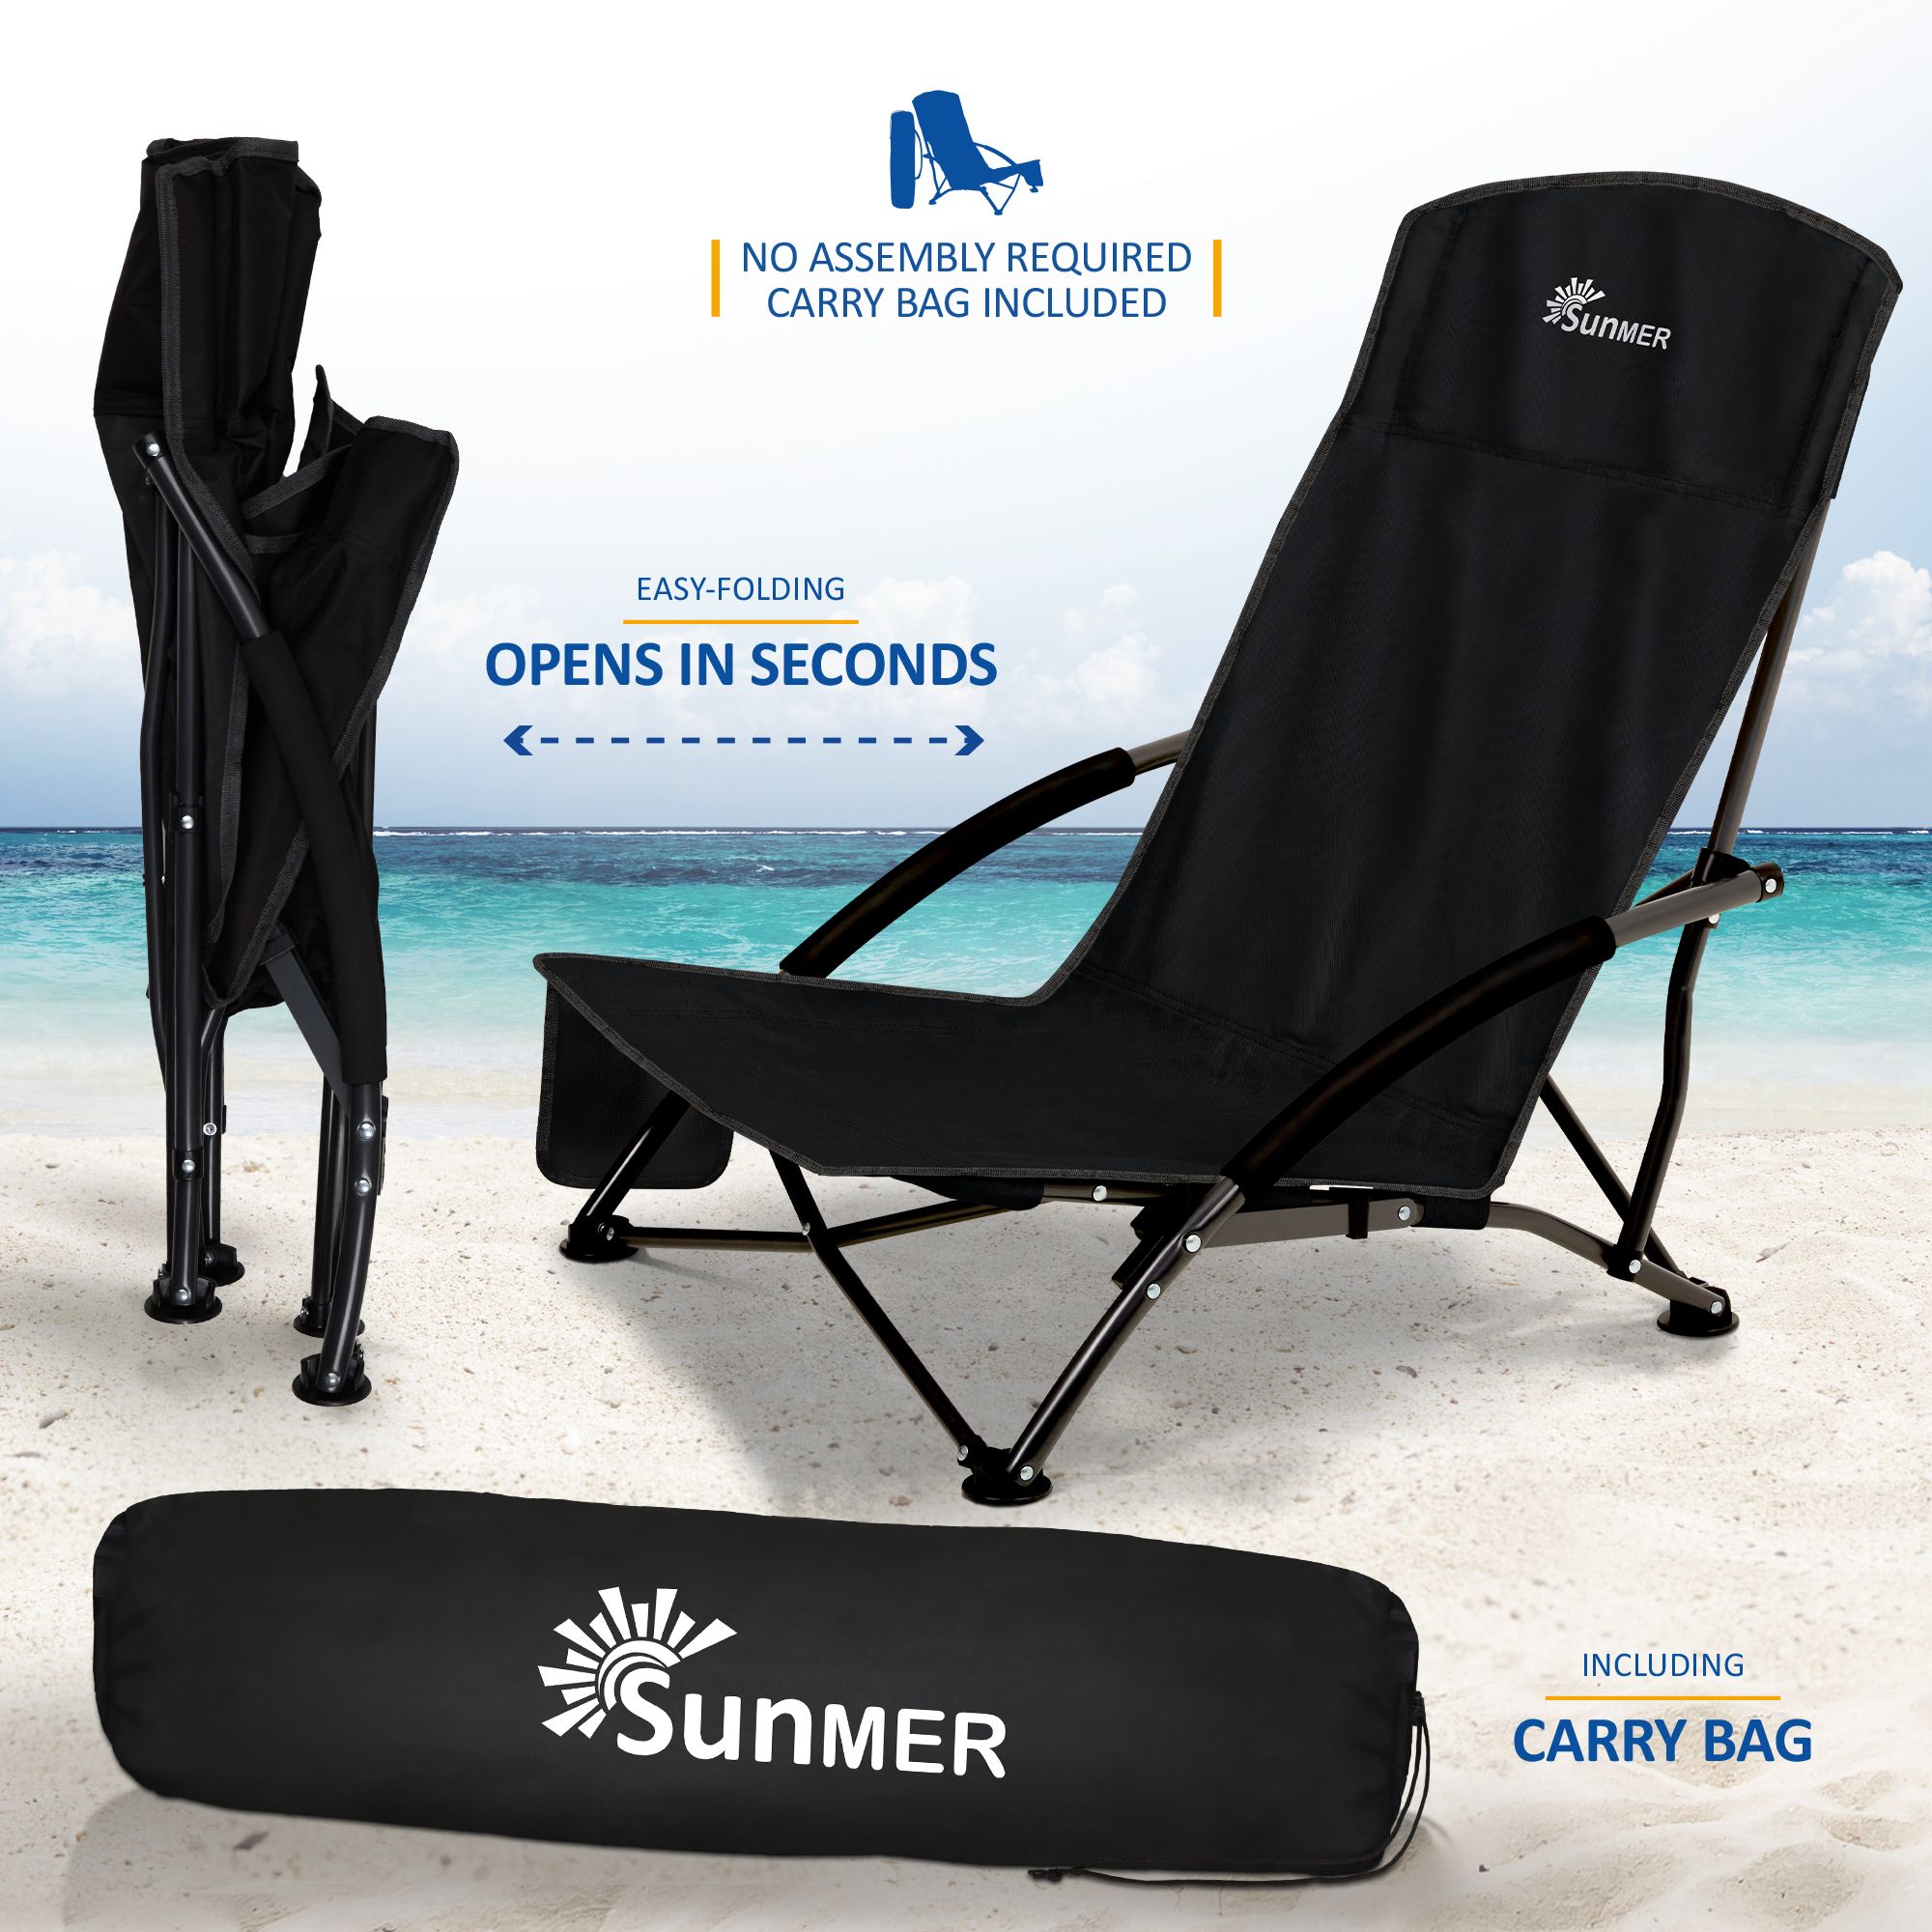 SUNMER Set of 2 Folding Beach Chair with Side Pocket & Carry Bag - Black